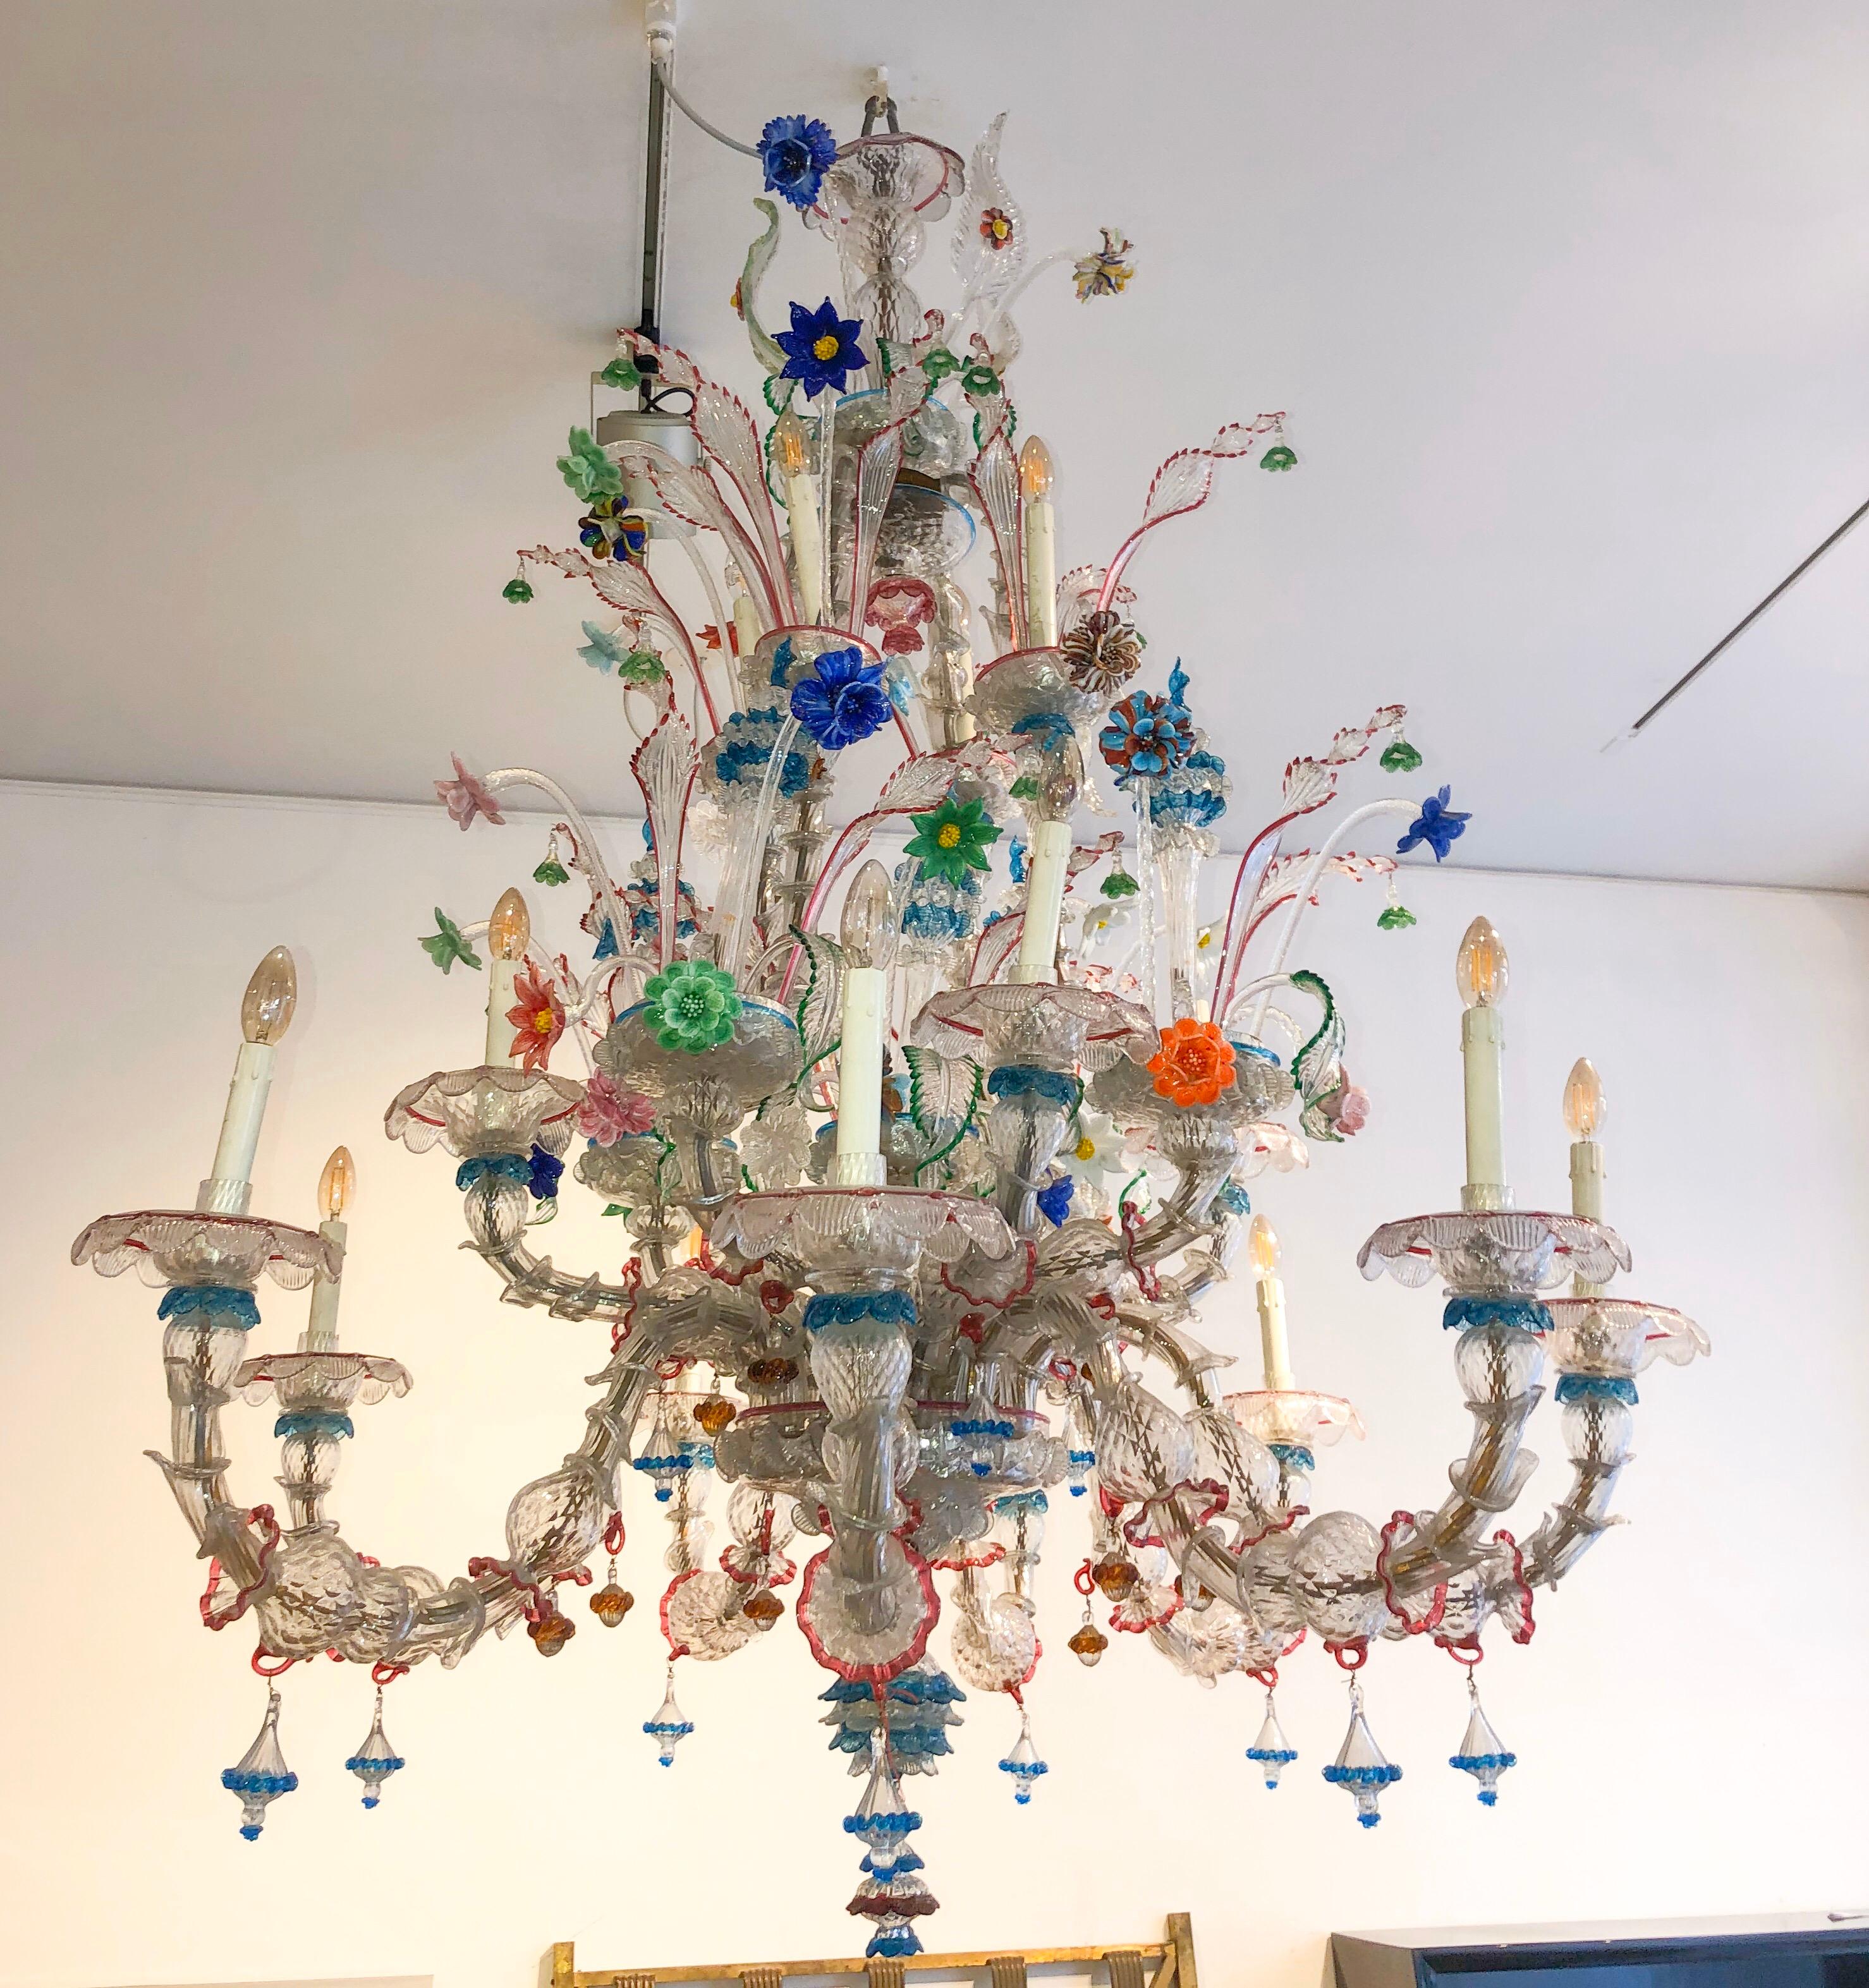 Magnificent colorful Ca'Rezzonico Murano glass chandelier from Italy from the 1940s. The type of Murano Chandelier is attributed to the famous glassmaker Galliano Ferro.

The colorful Murano chandelier has a total of 16 lights spread over four